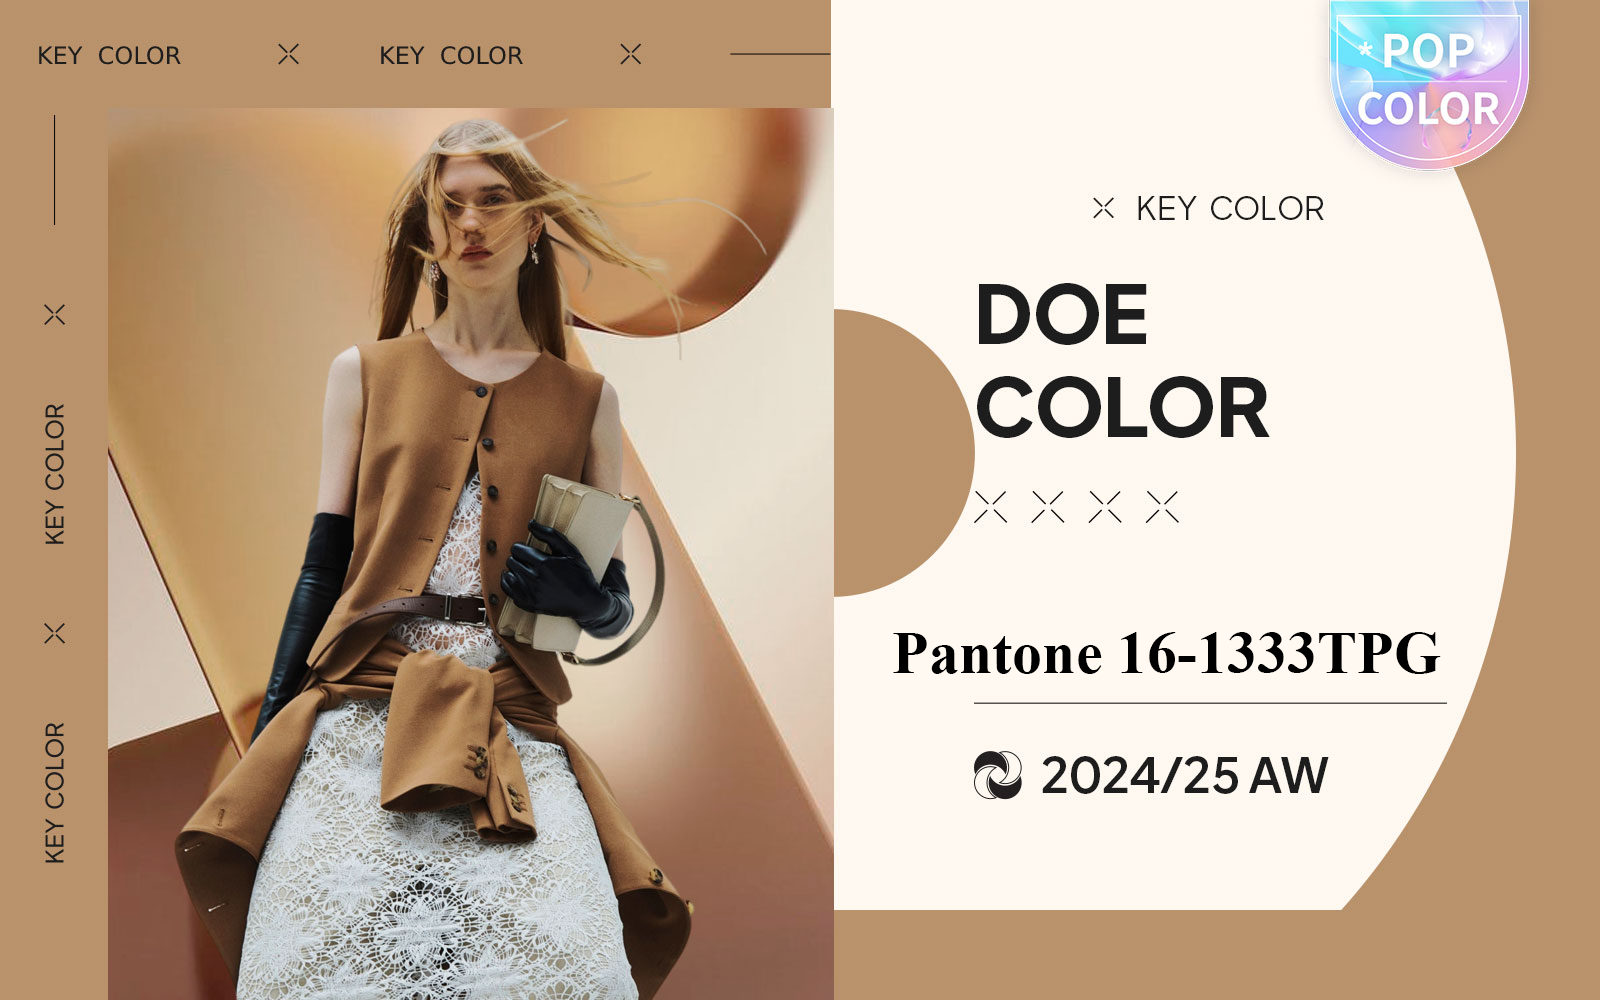 Doe -- The Color Trend for Womenswear